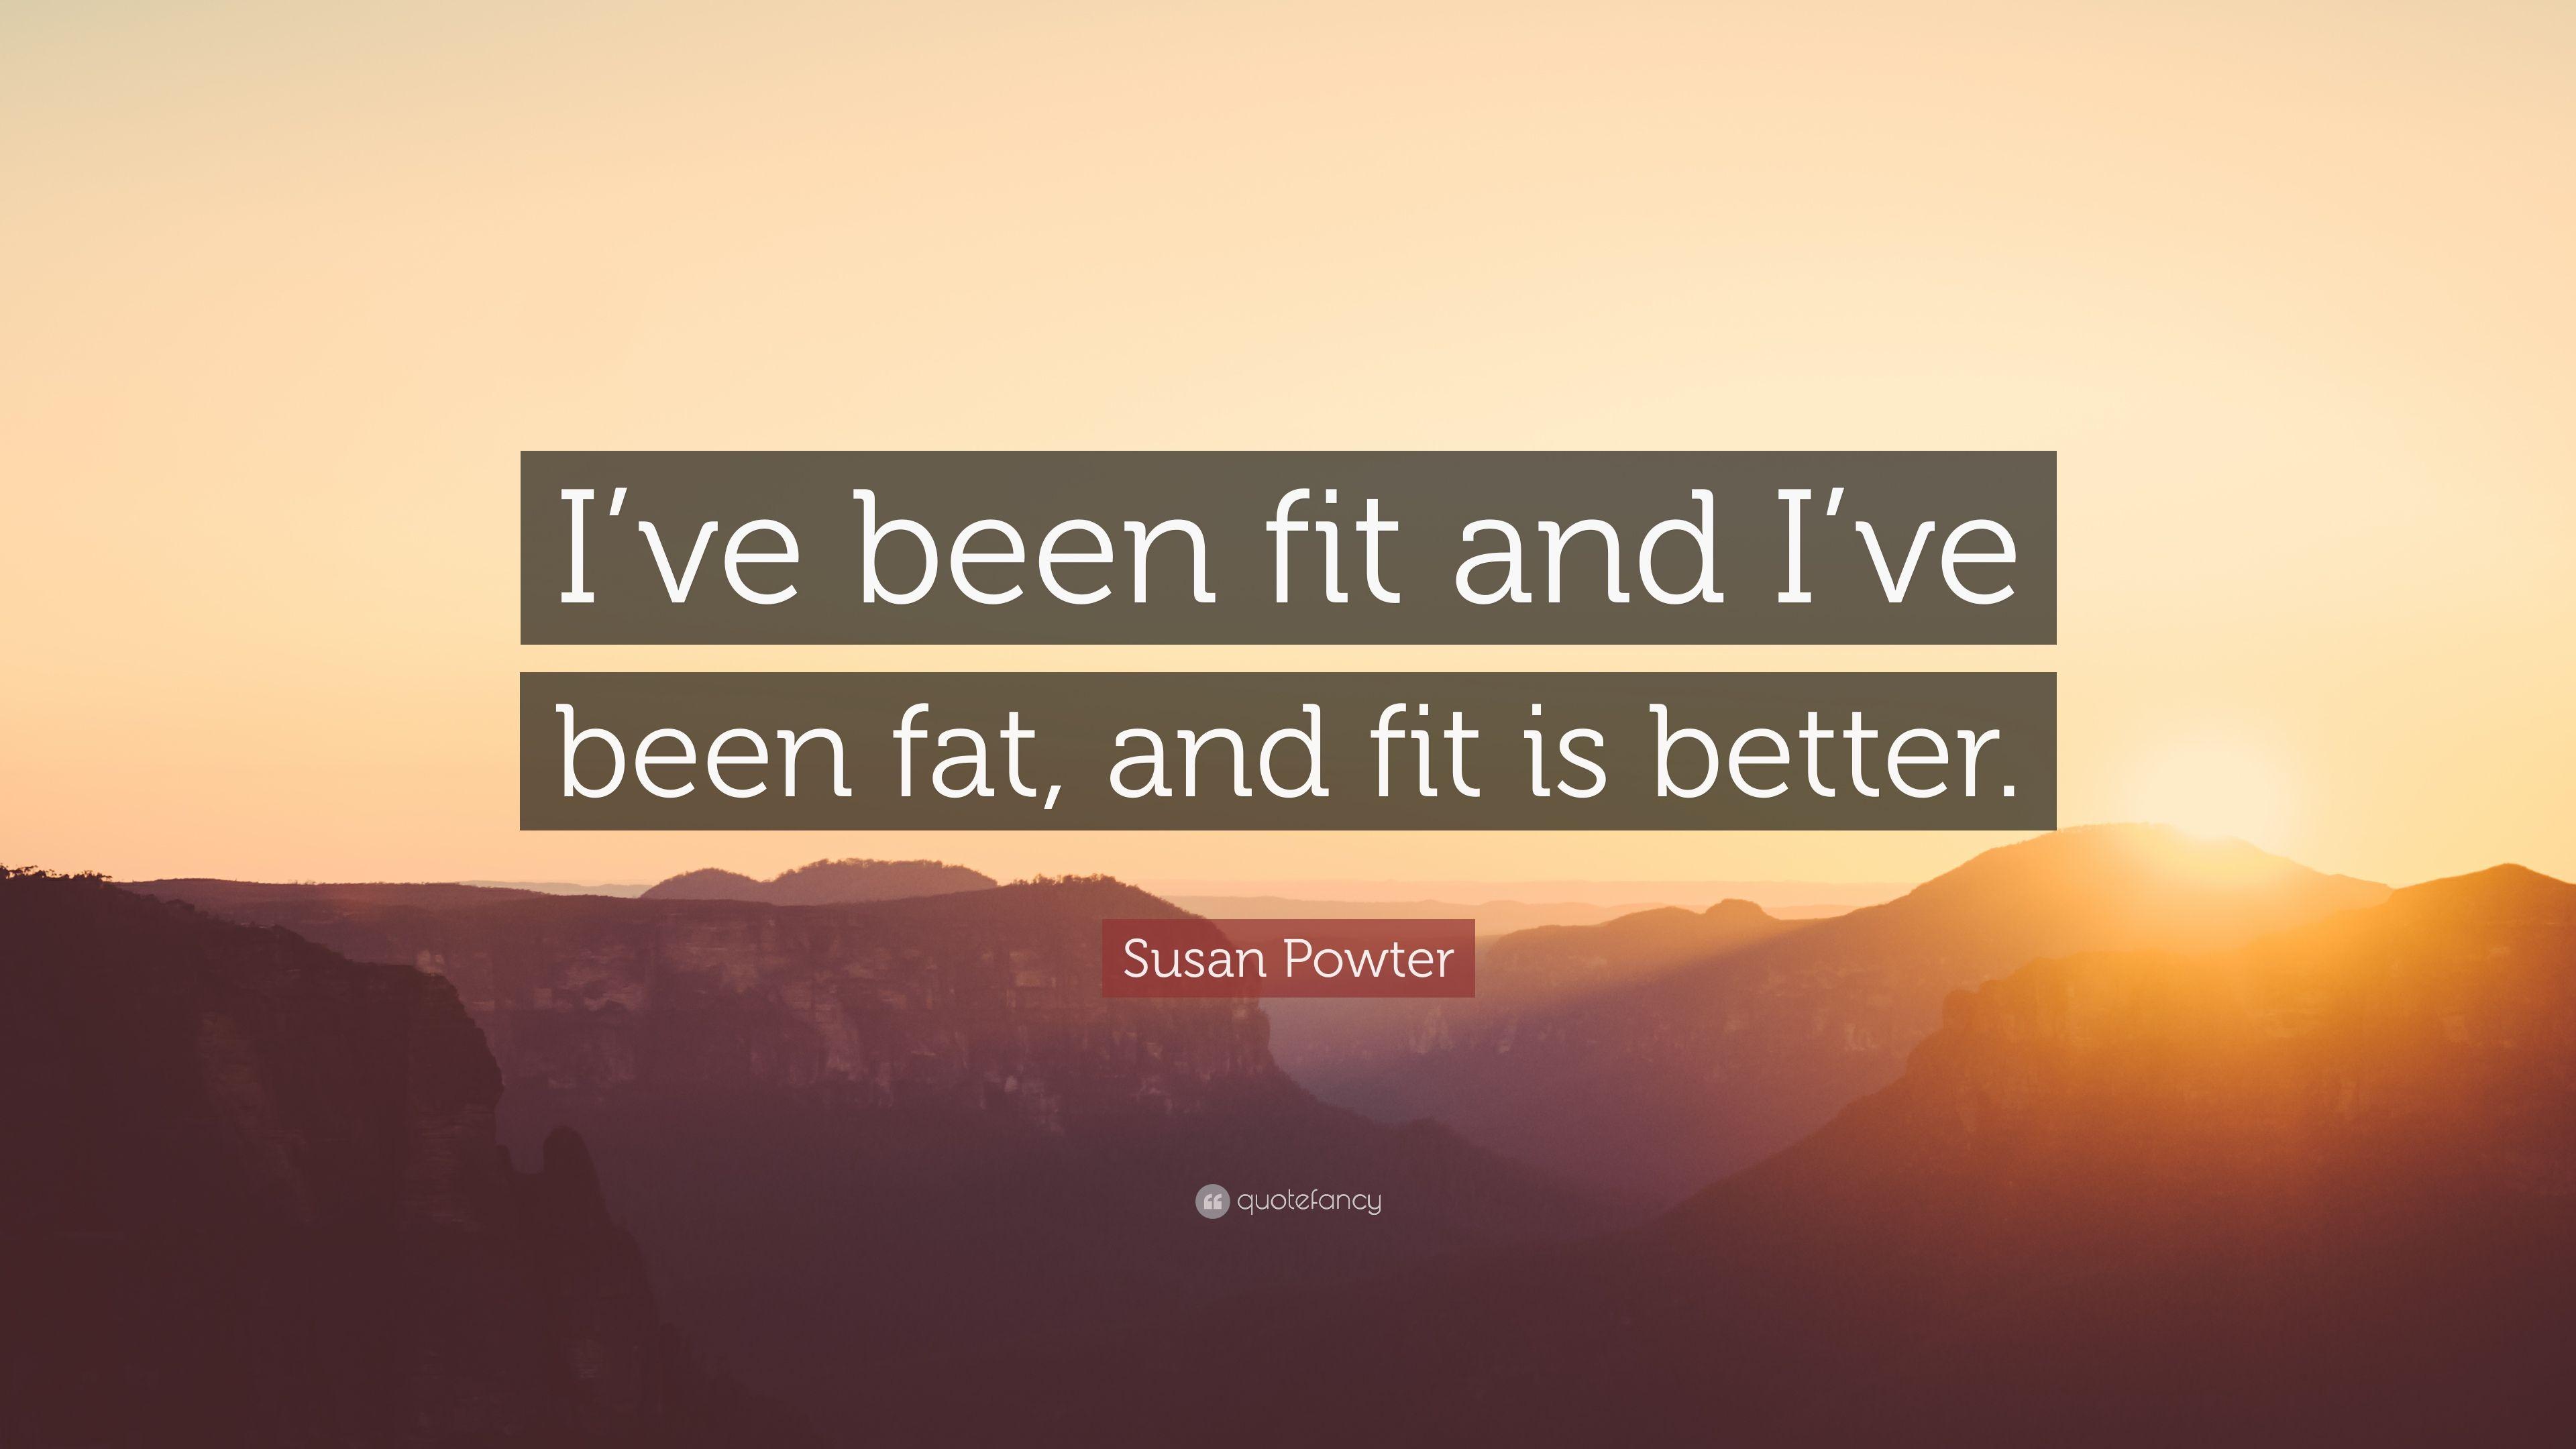 Susan Powter Quote: “I've been fit and I've been fat, and fit is